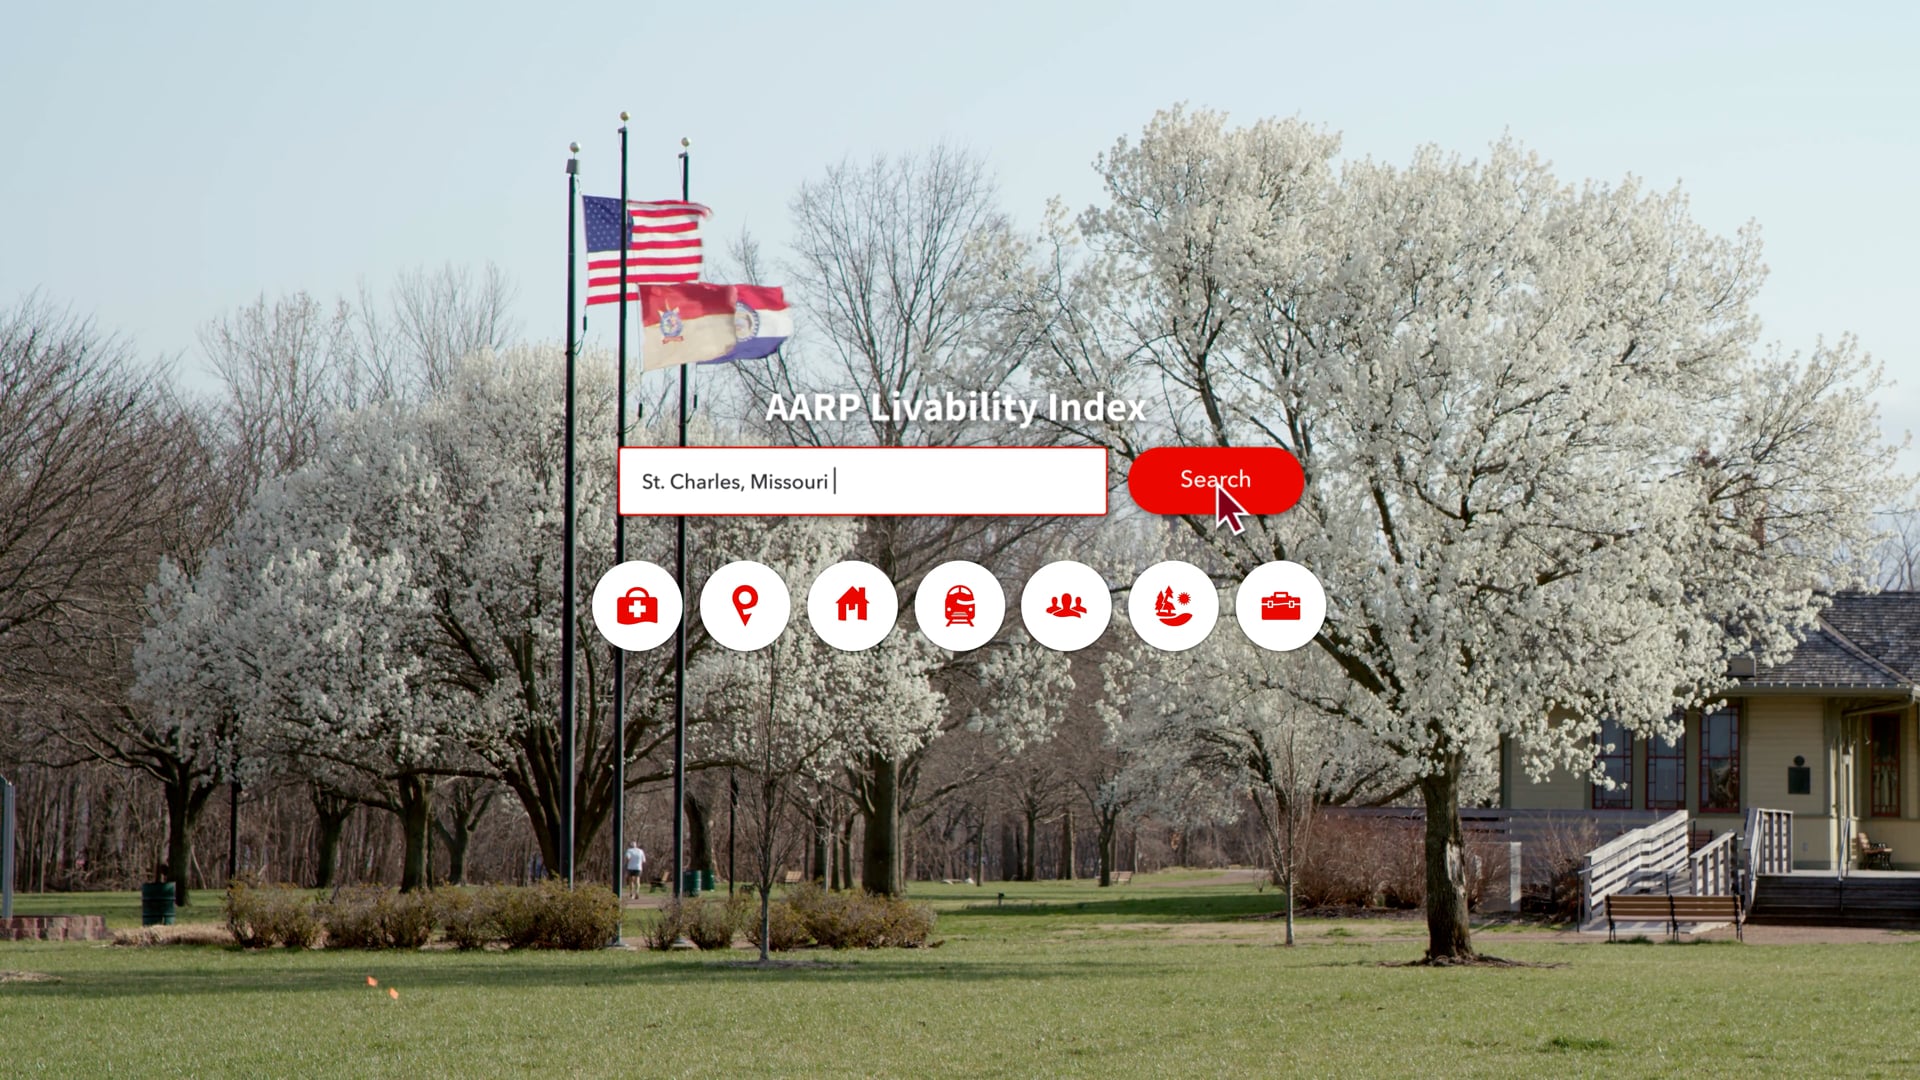 AARP Livability Index: Transportation in St. Charles, MO